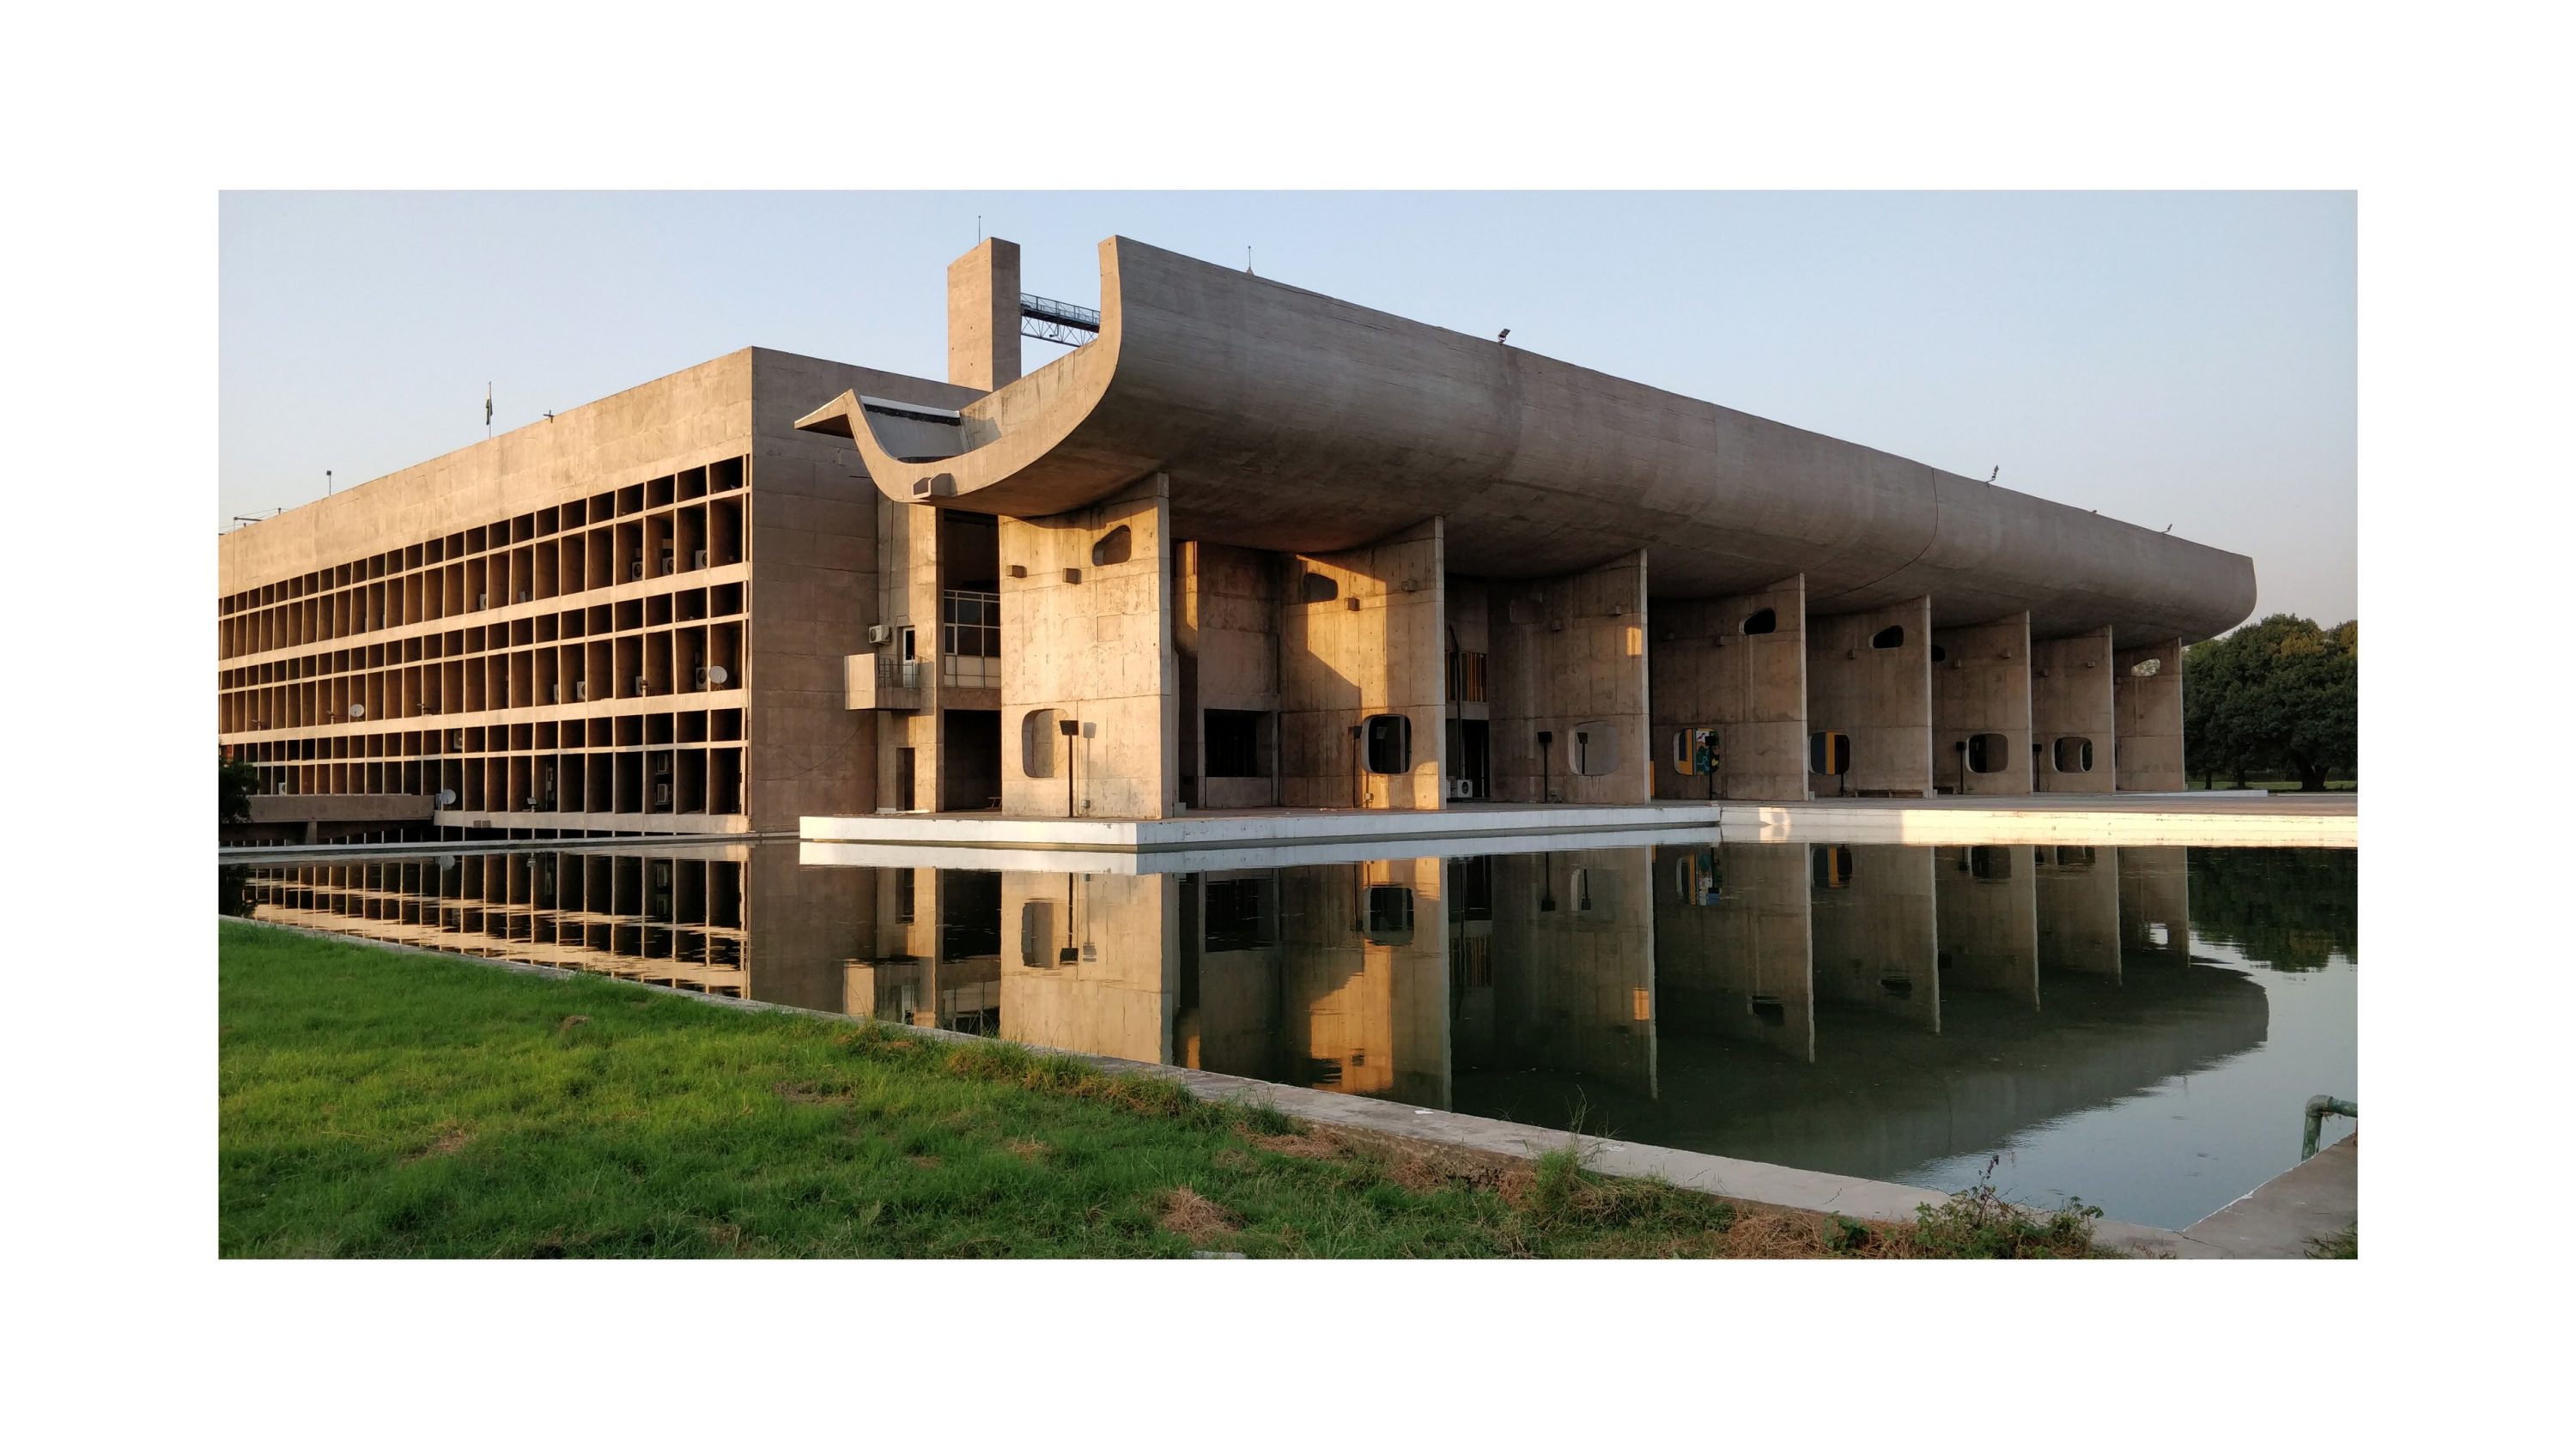 Kumu Documentary: The Power of Utopia: Living With Le Corbusier in 